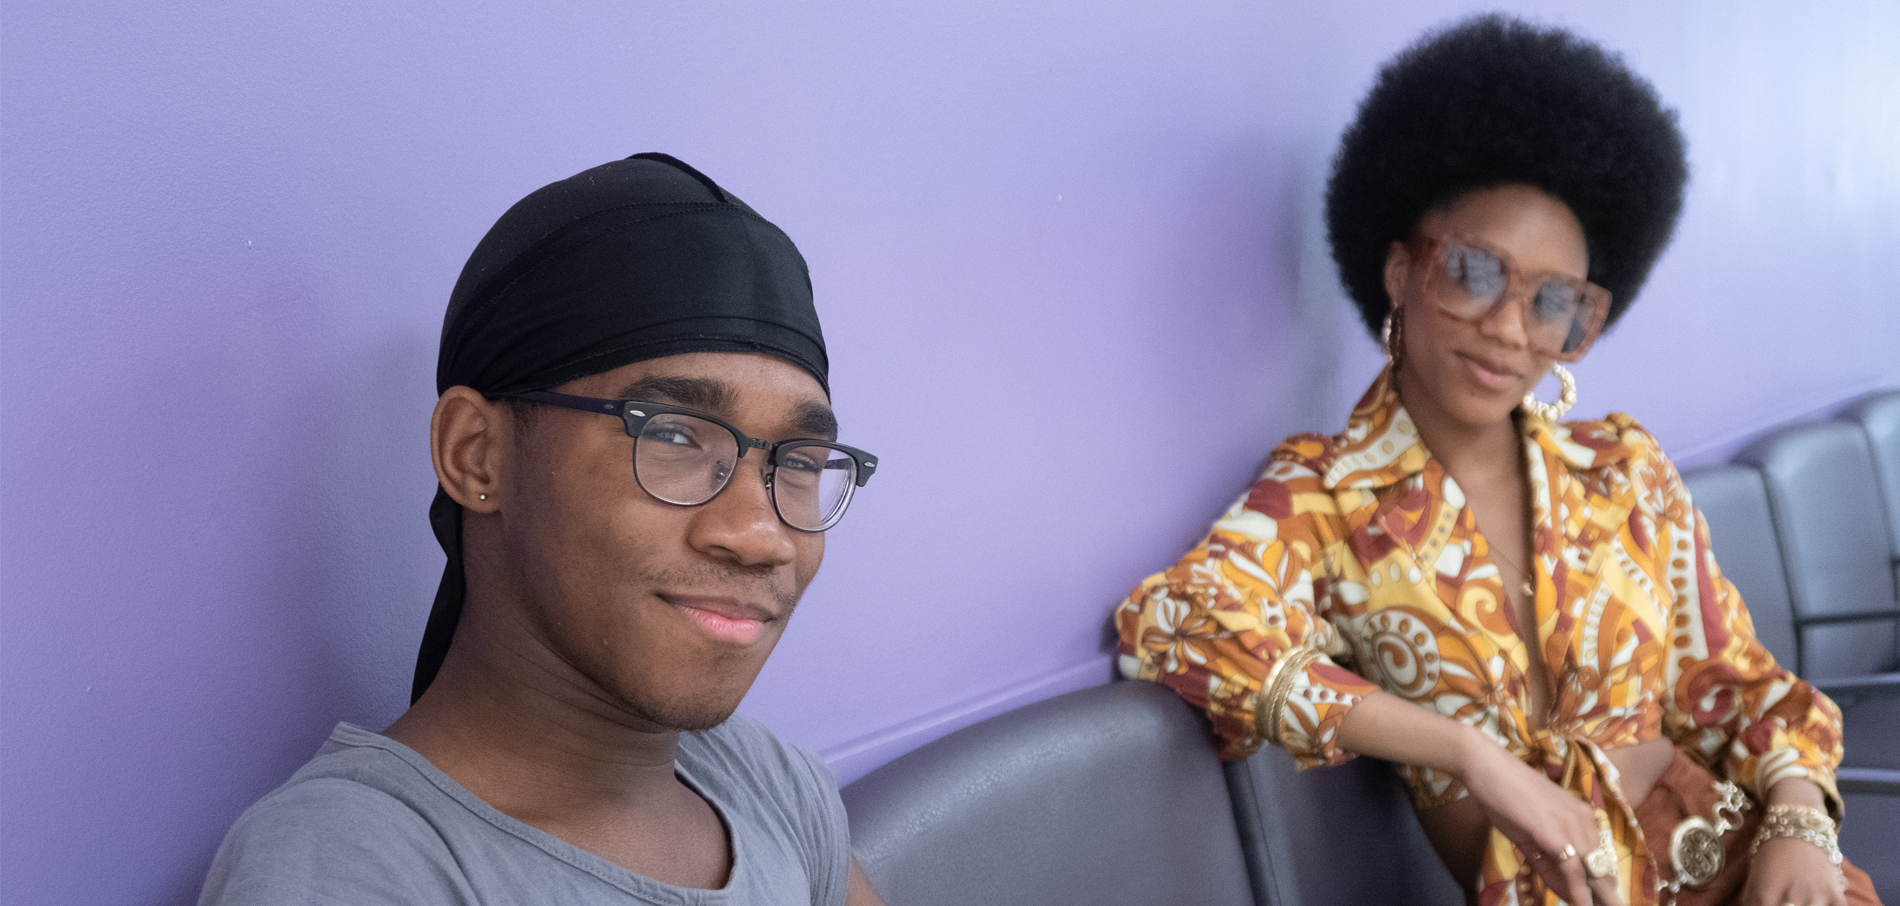 two smiling FIT students sitting in room with purple background